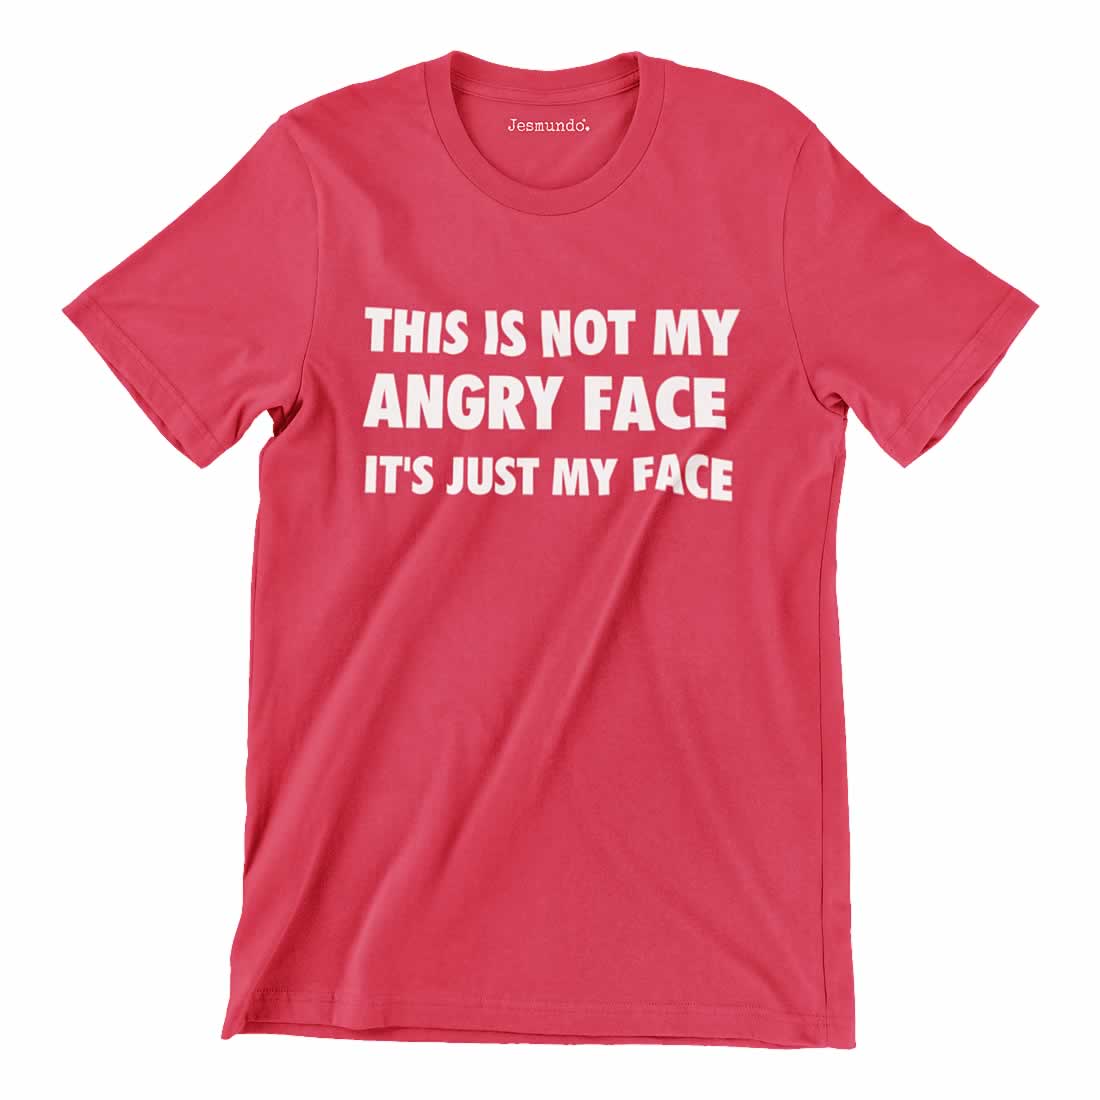 This is not my angry face it's just my face t-shirt